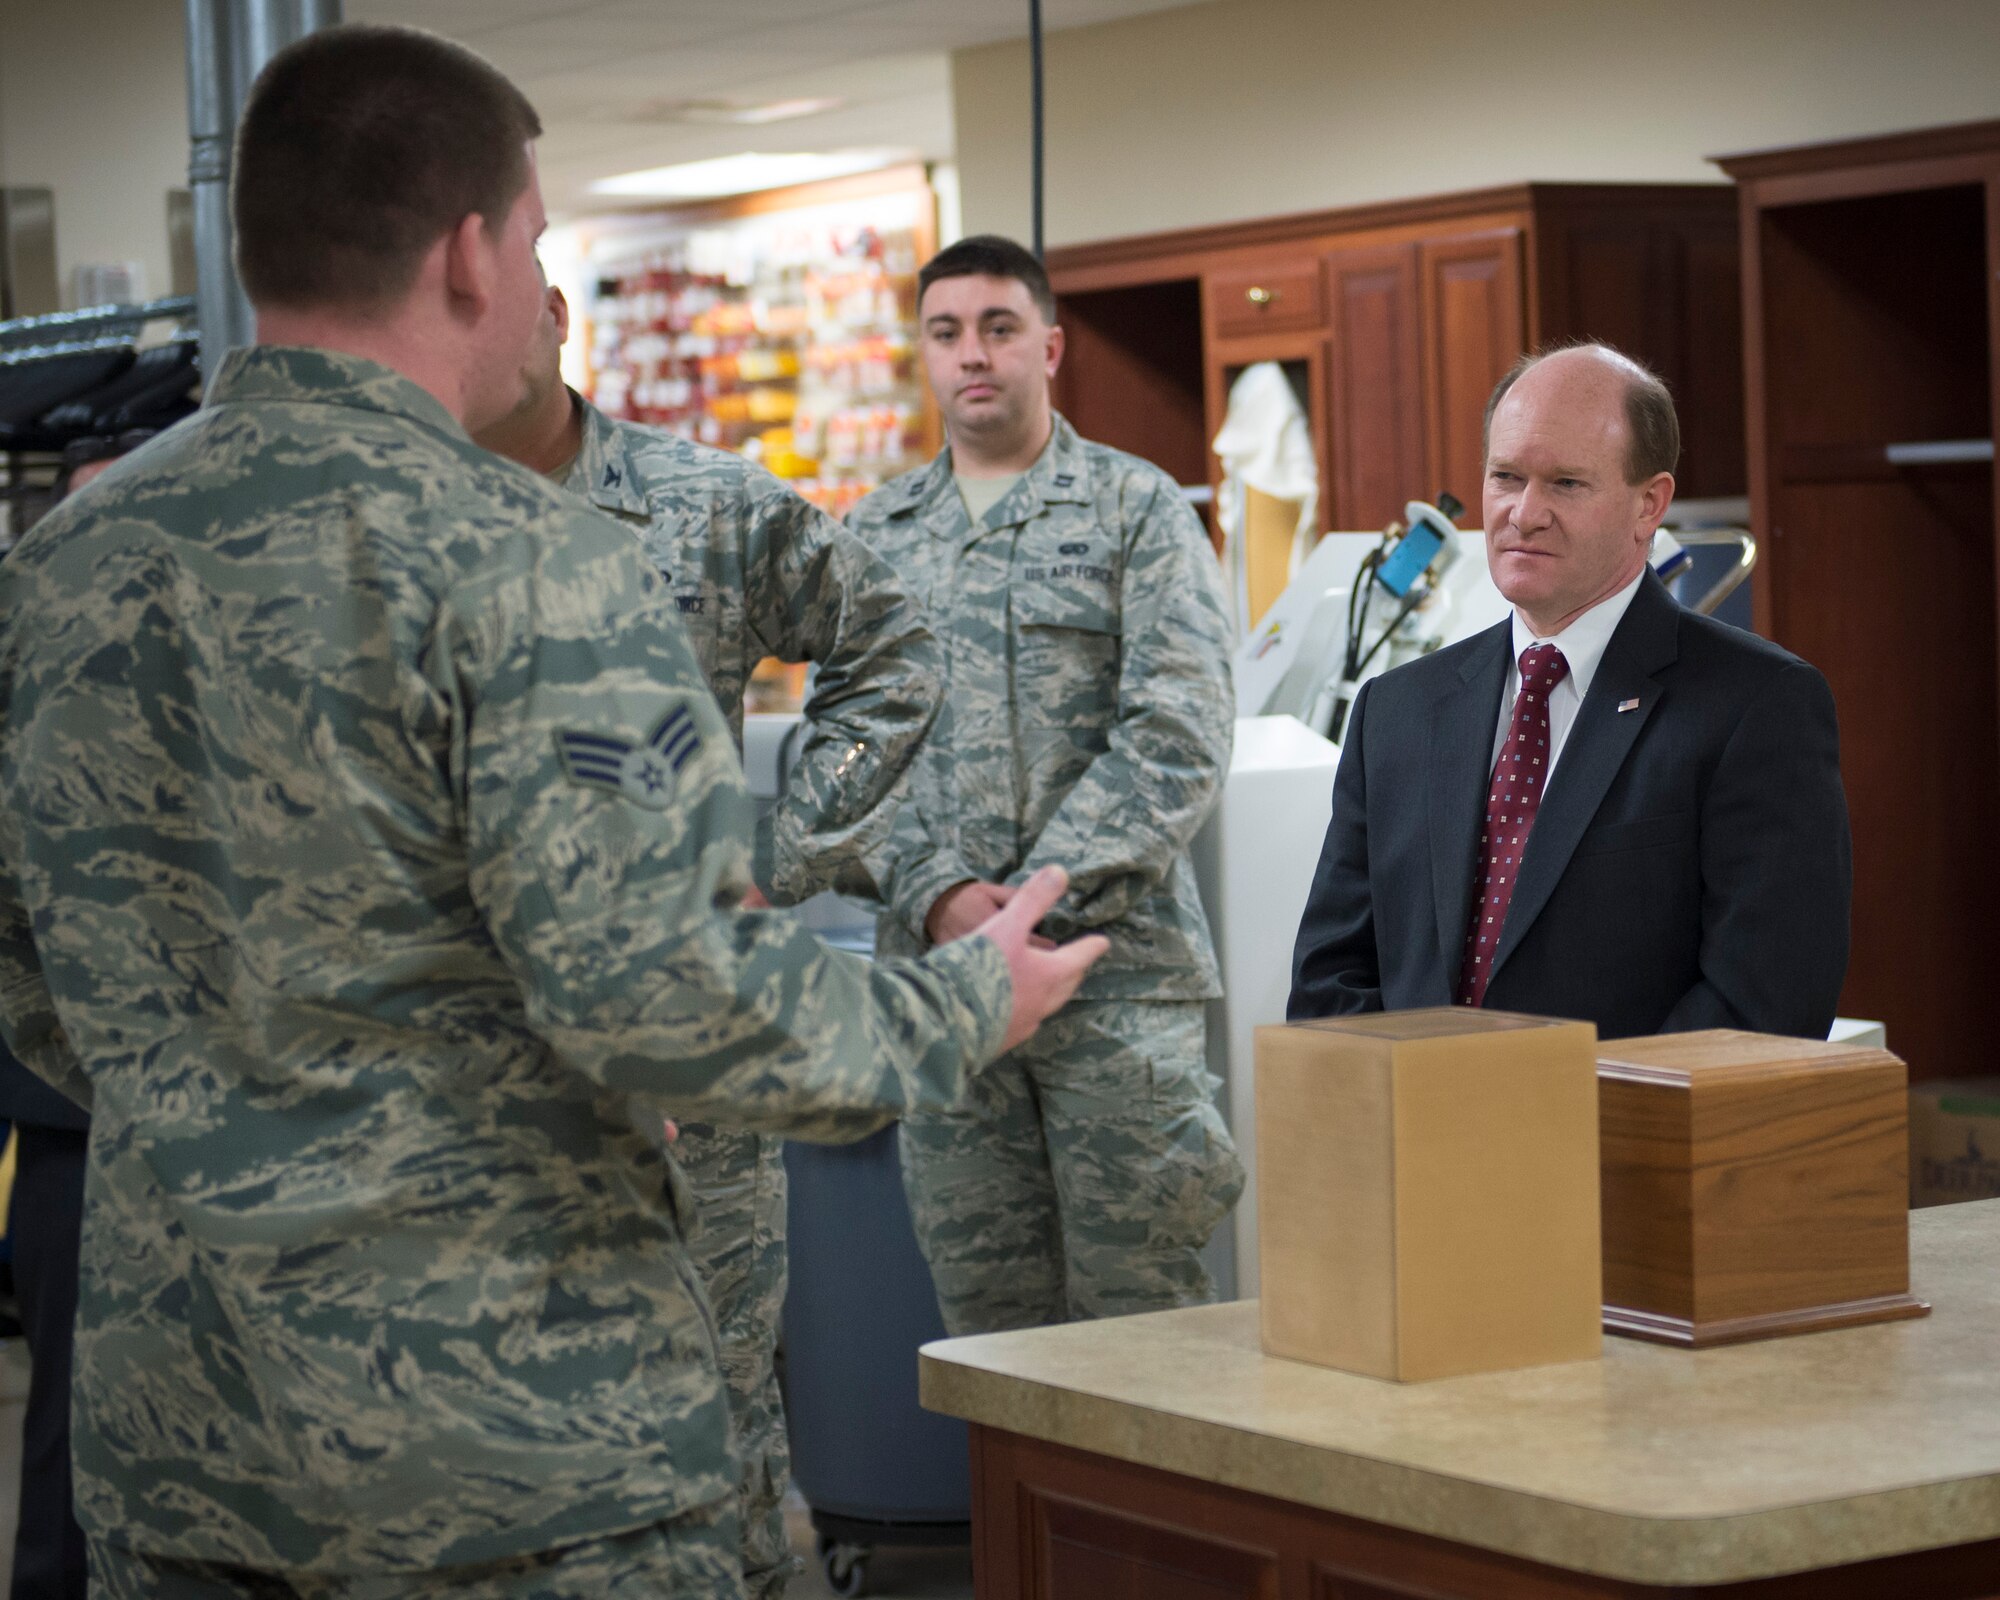 Senior Airman Nicholas Wavra, a services Airman assigned to the Air Force Mortuary Affairs Operations Dress and Restoration section, explains how he helps prepare uniforms for fallen warriors to Sen. Chris Coons of Delaware Feb. 9, 2015, during the senator’s visit to Dover Air Force Base, Del. Wavra and other AFMAO Airmen briefed Coons on the unique tasks performed at the Department of Defense’s sole port mortuary. (U.S. Air Force photo by Capt. Ray Geoffroy)